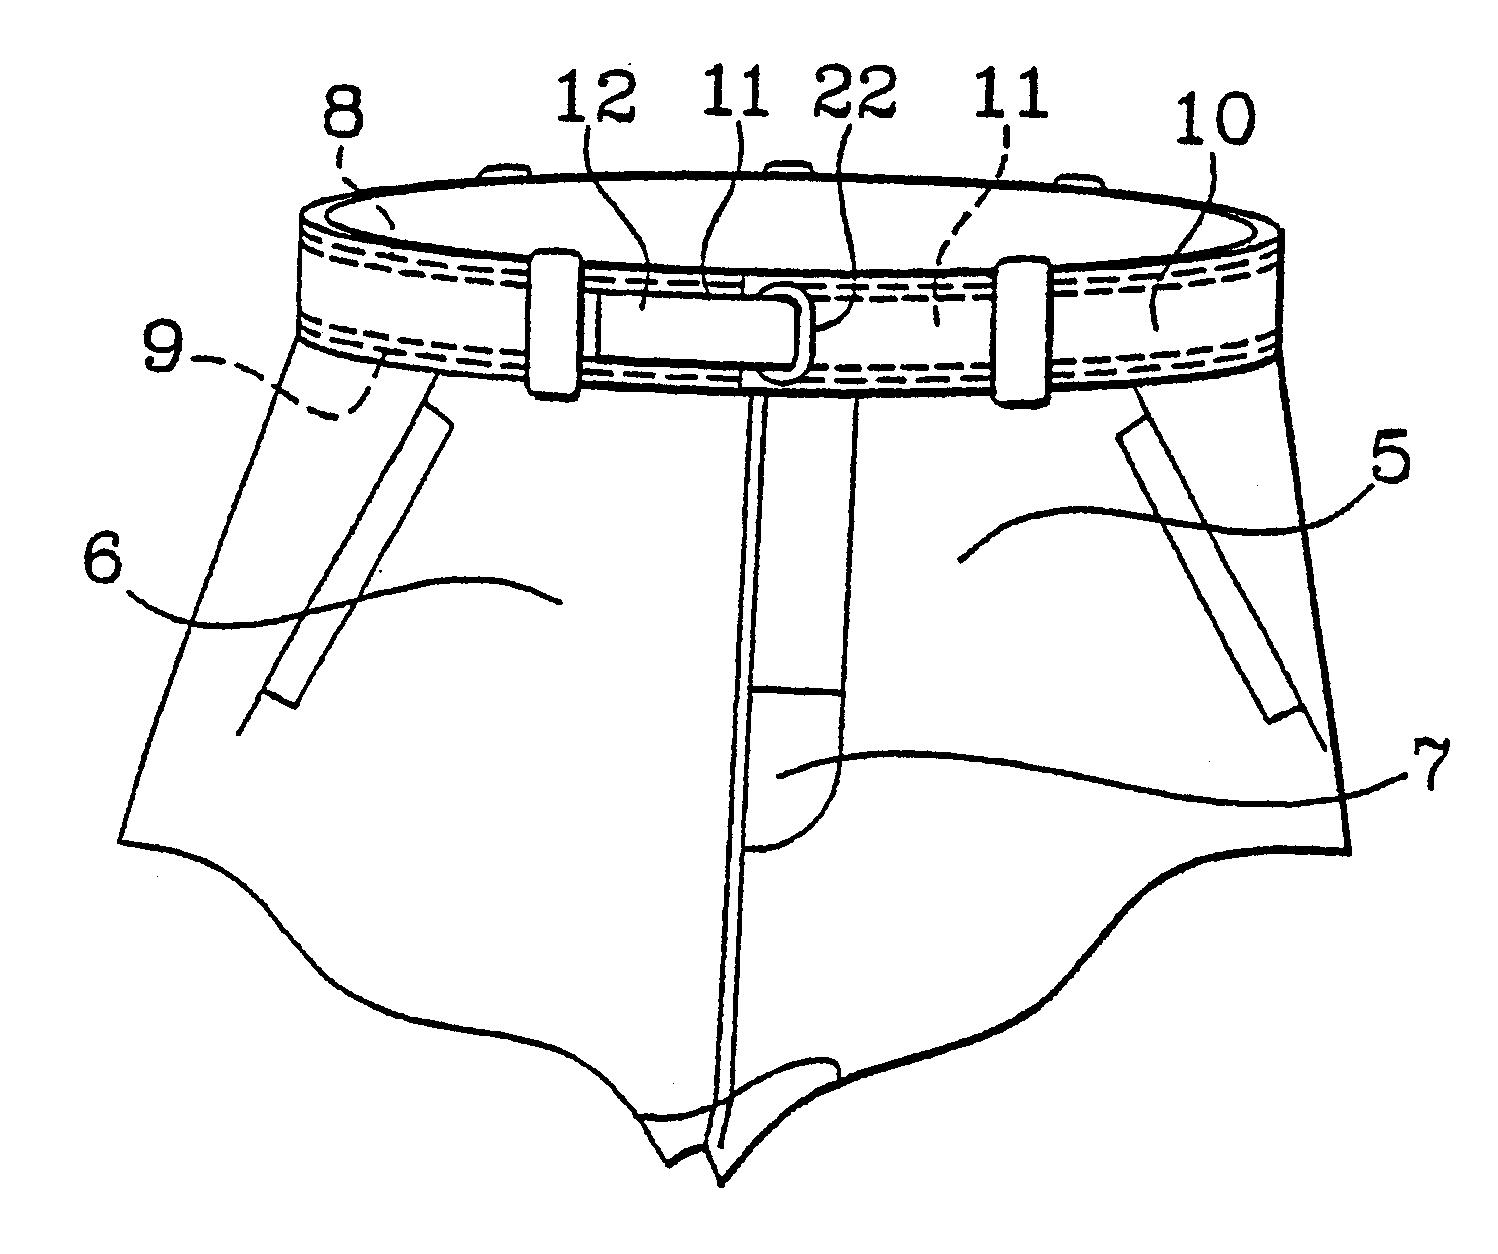 Pair of pants equipped with a tightening strap